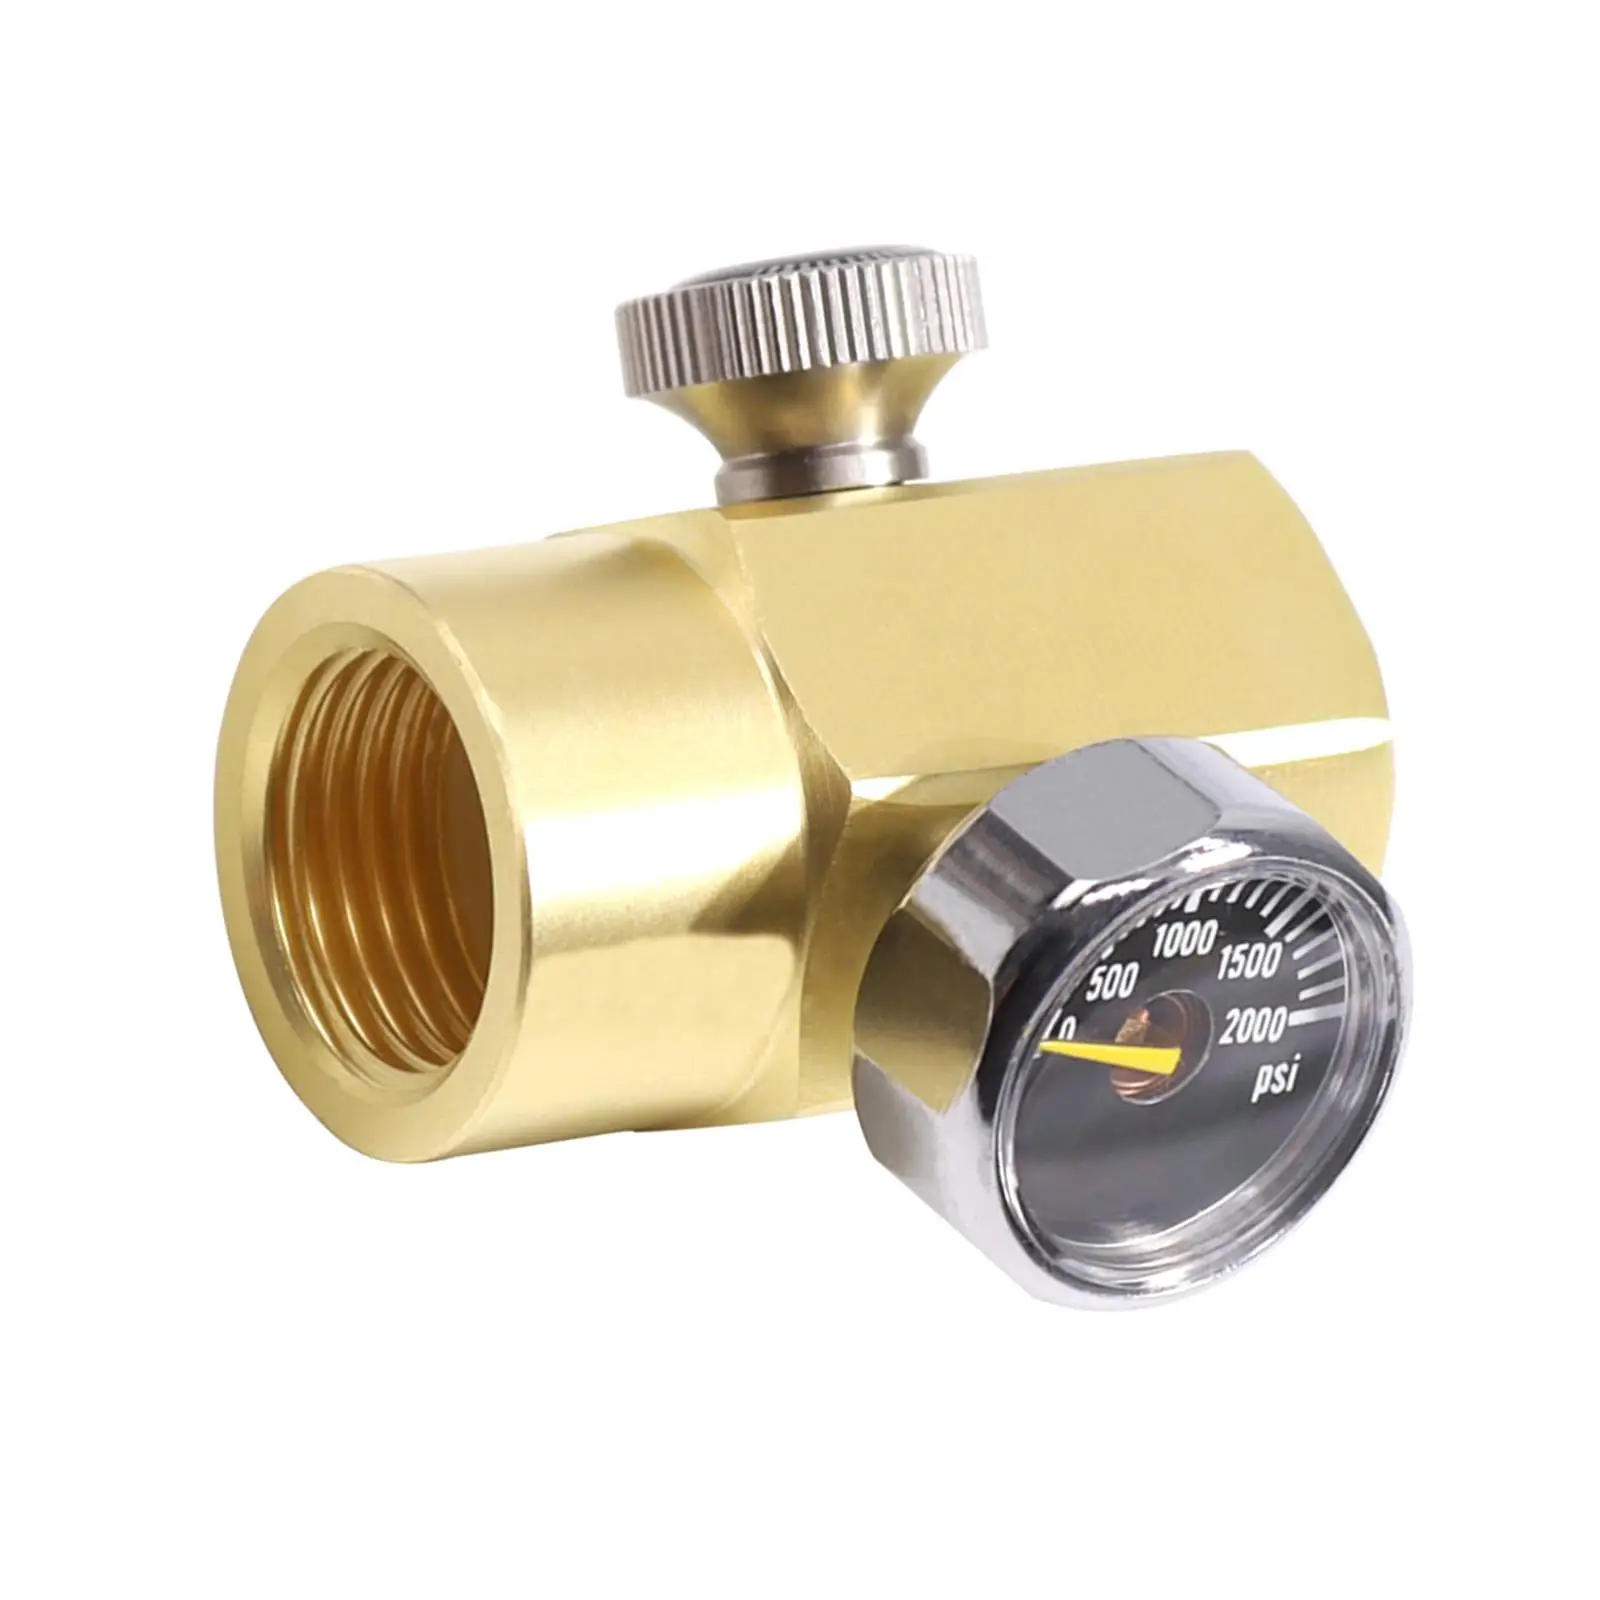 Brass Soda Refill Bottle Co2 Cylinder Filling Adapter With 2000Psi Pressure Inflatable Valve W21.8-14